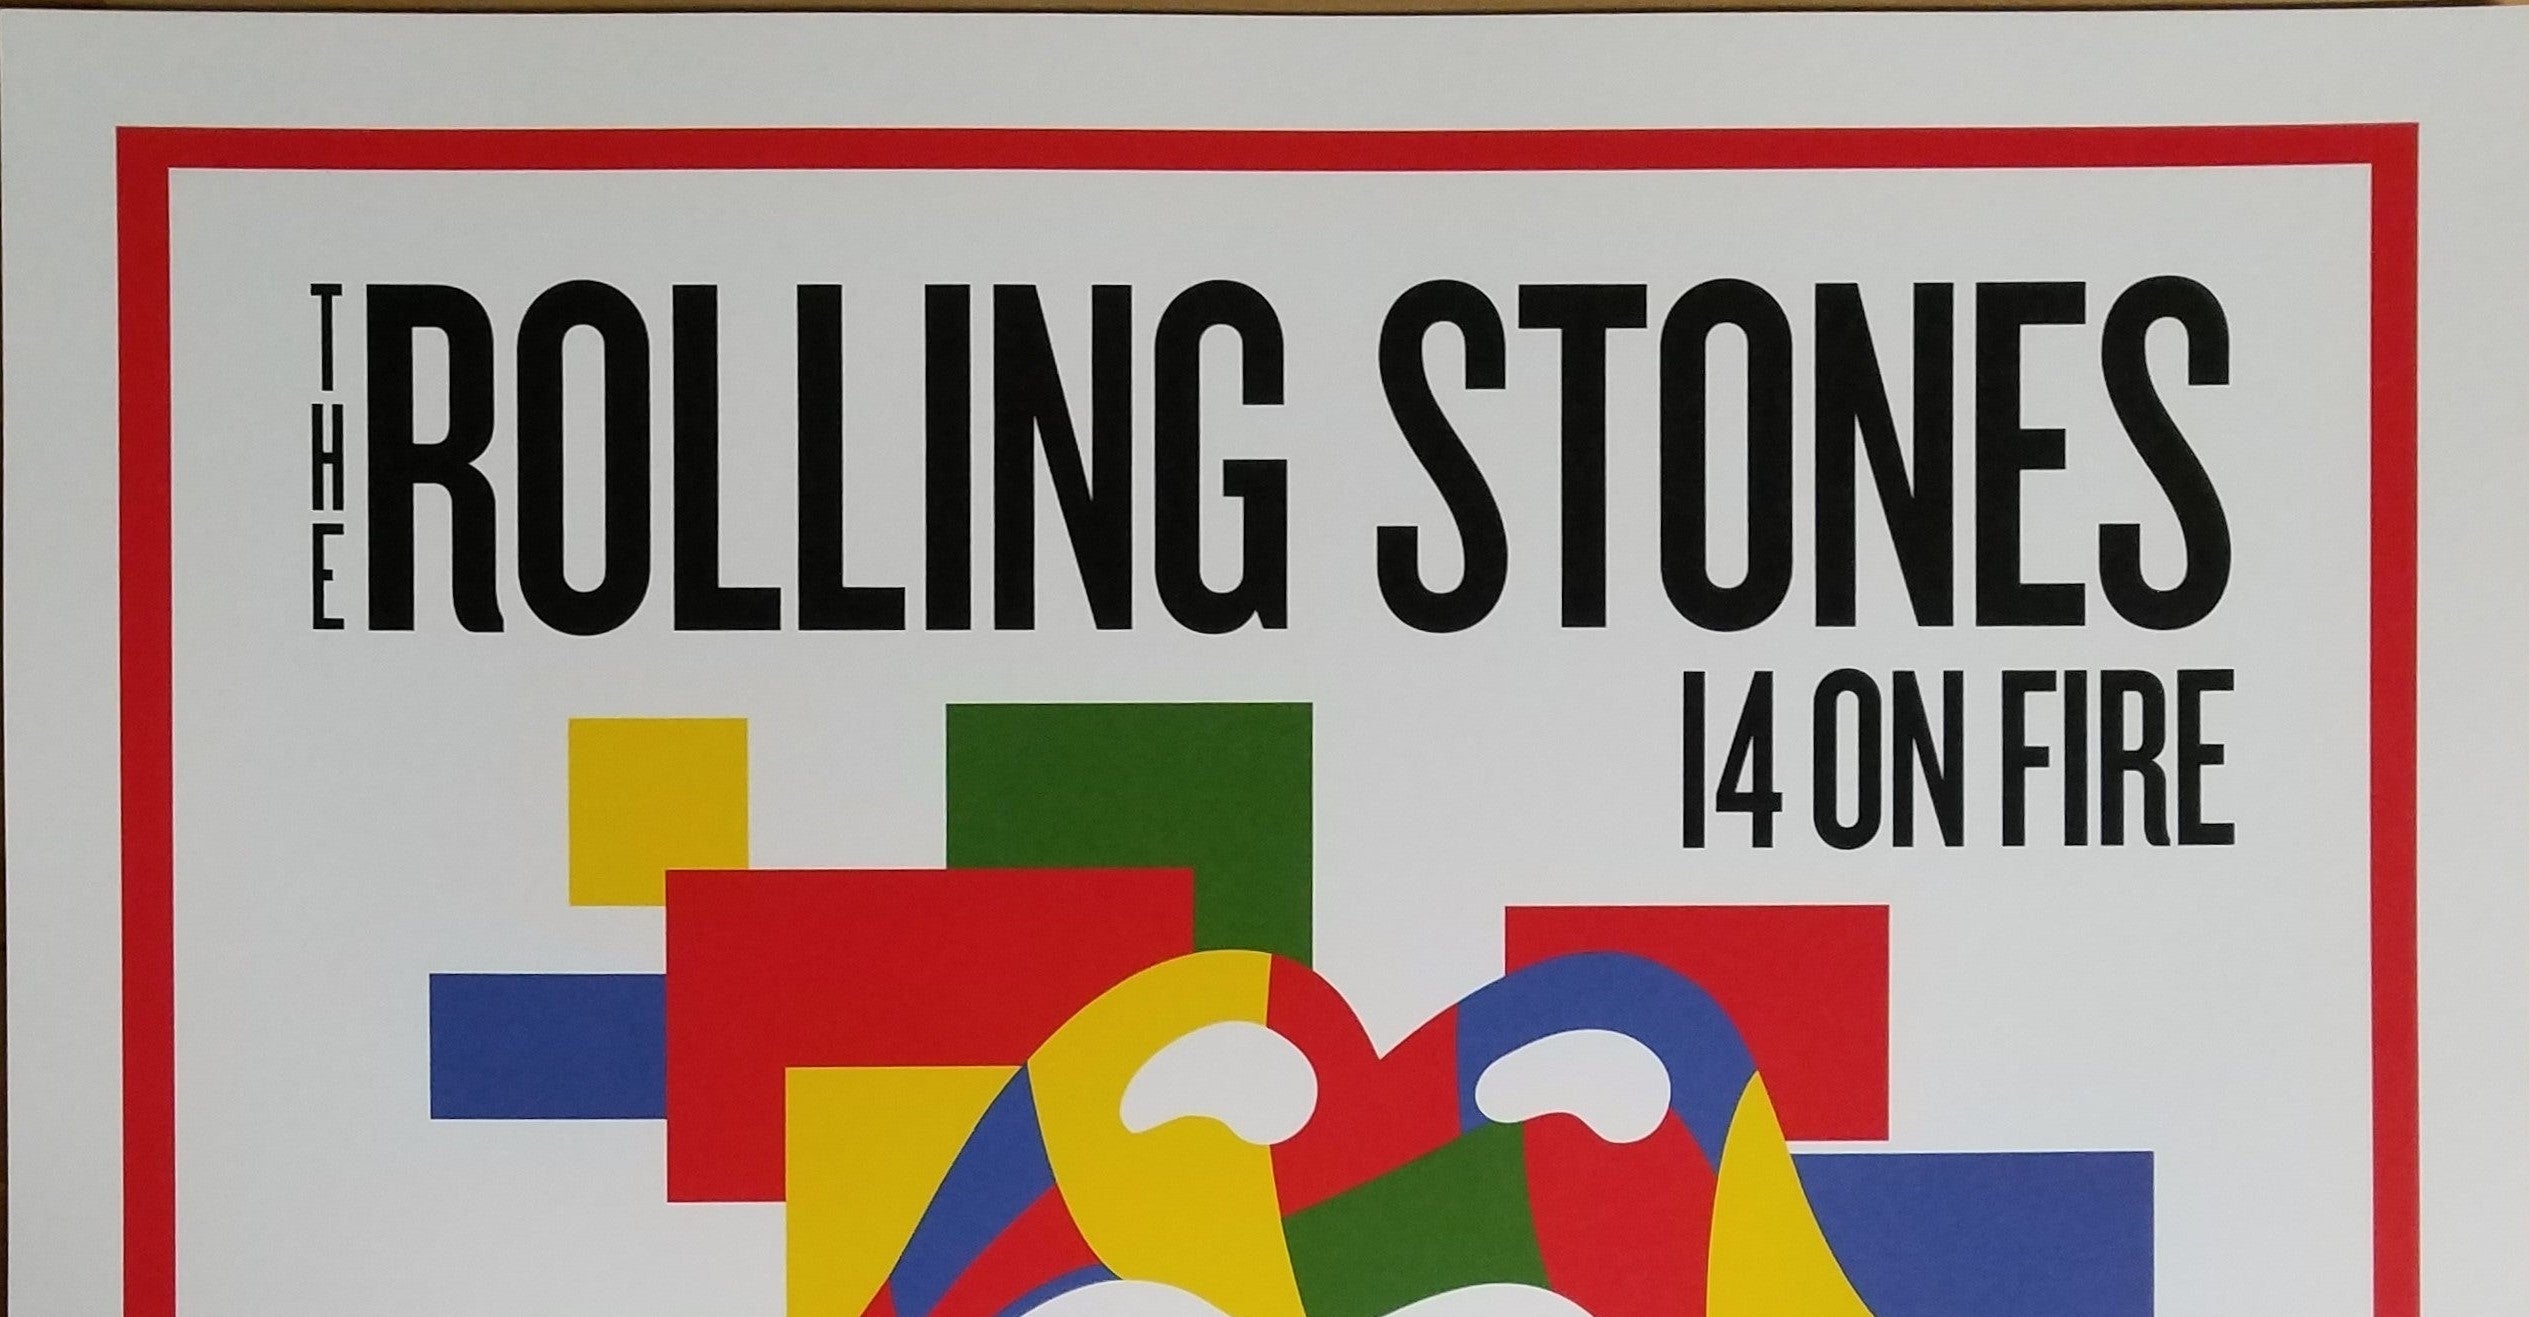 Title: Rolling Stones   Edition: 1st edition, official poster hand numbered and embossed.  Type: Lithograph.  Edition:  xx/500  Size: 17" x 23"  Location: Zurich, Switzerland   Venue: Letzigrund Stadium   Notes: Official poster, Europe 14 On Fire Tour original from the show!